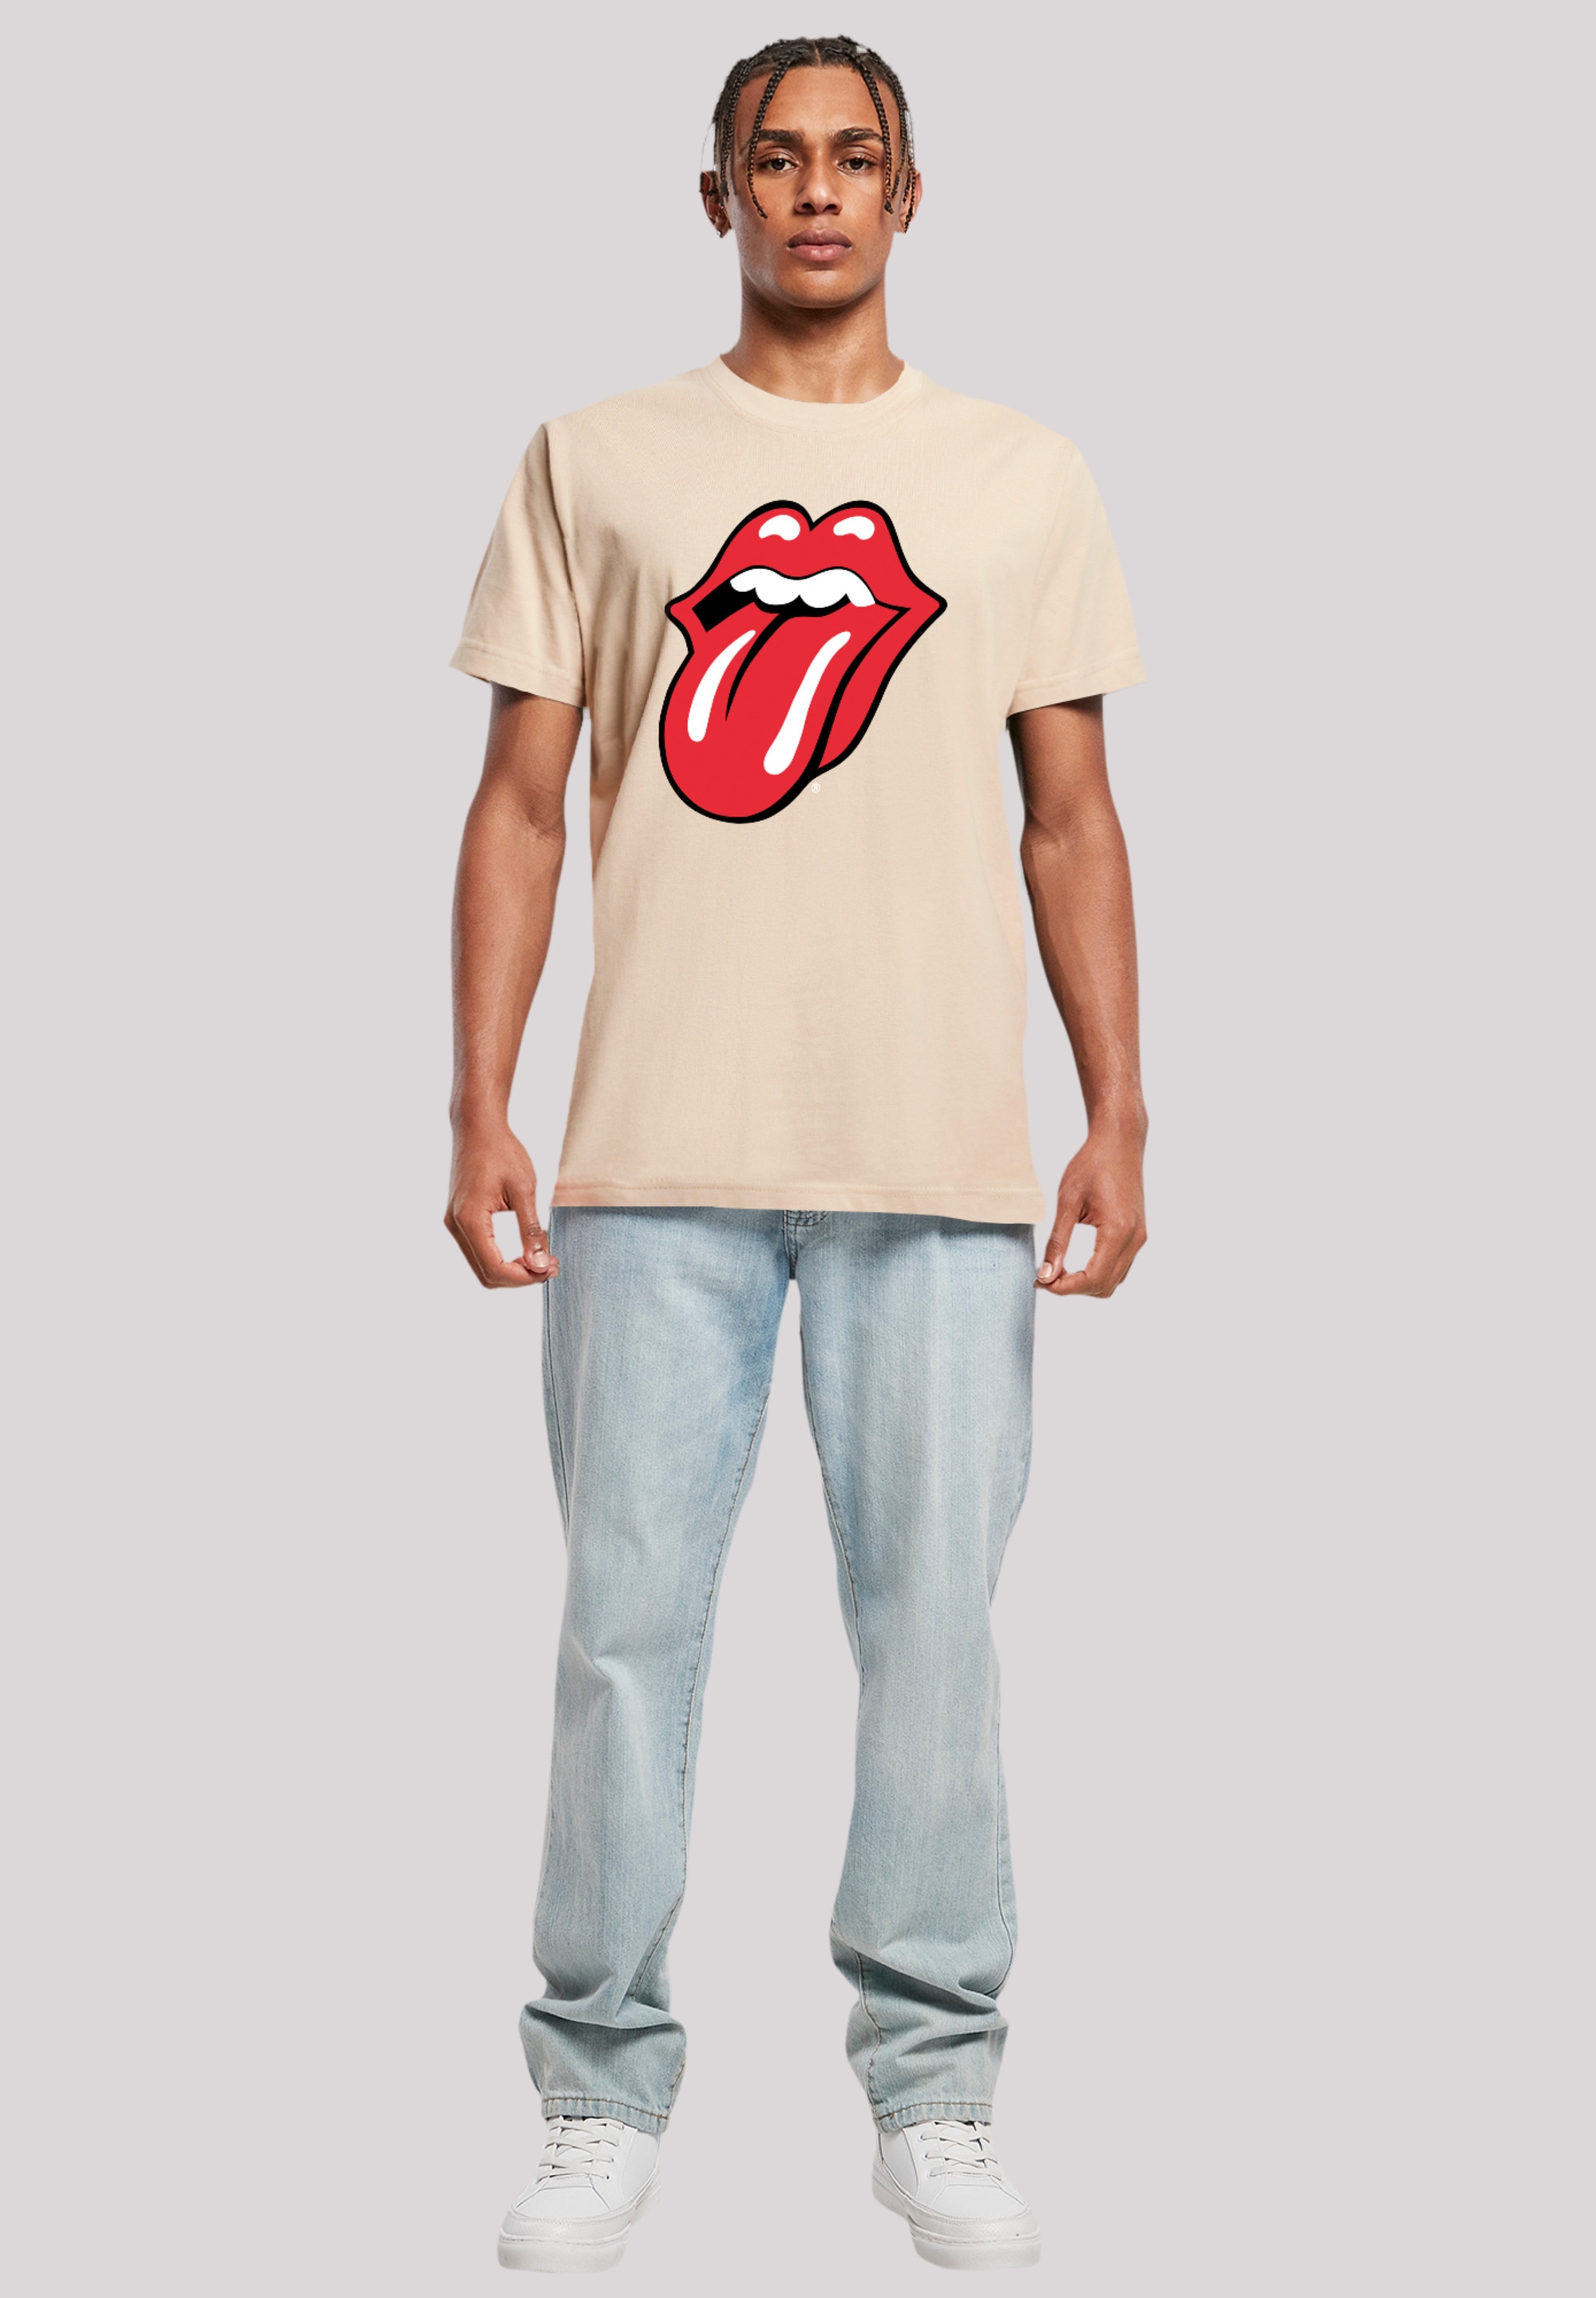 Print T-Shirt Rolling bestellen Stones Rote »The Zunge«, F4NT4STIC